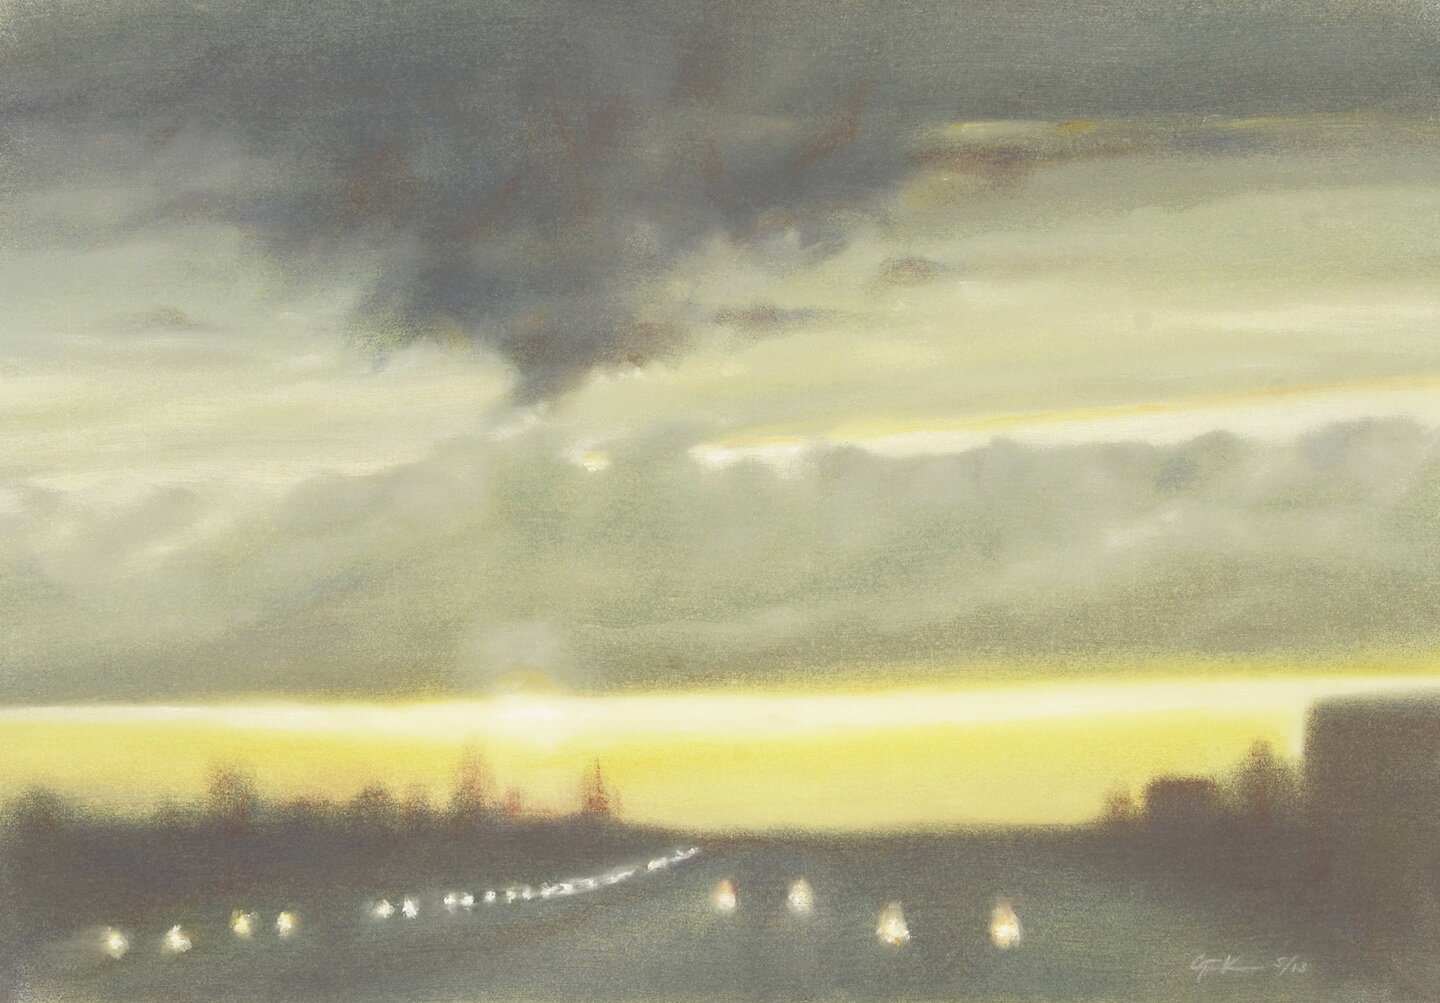    I-540 Rogers Whipped Clouds  , 19” x 25”, pastel on paper 